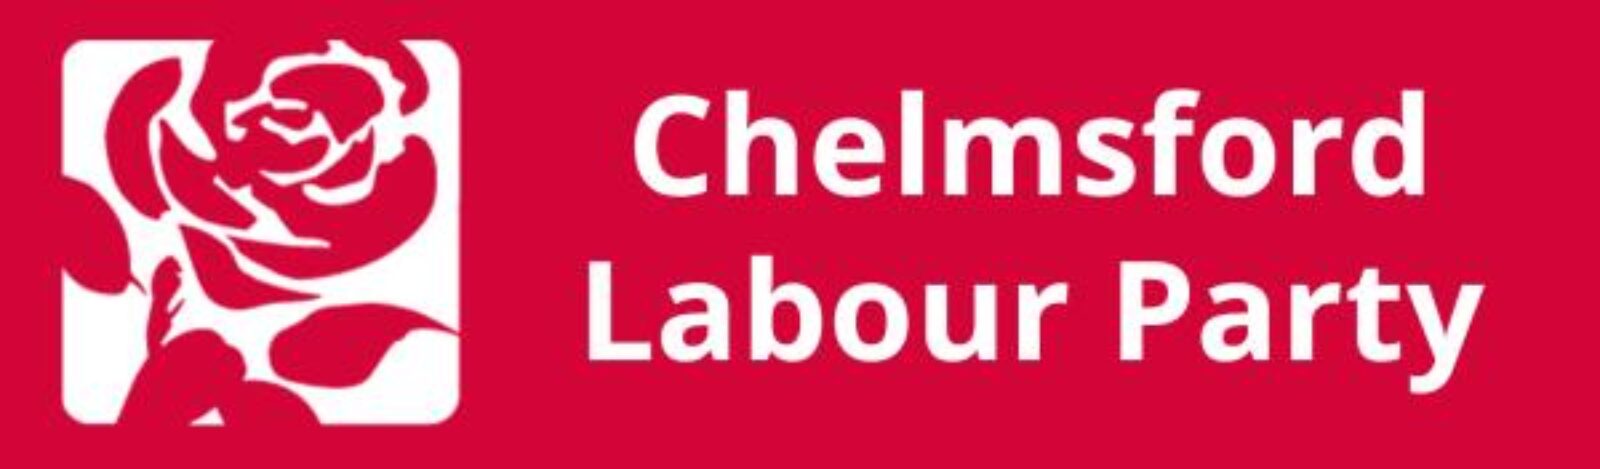 Chelmsford Labour Party banner